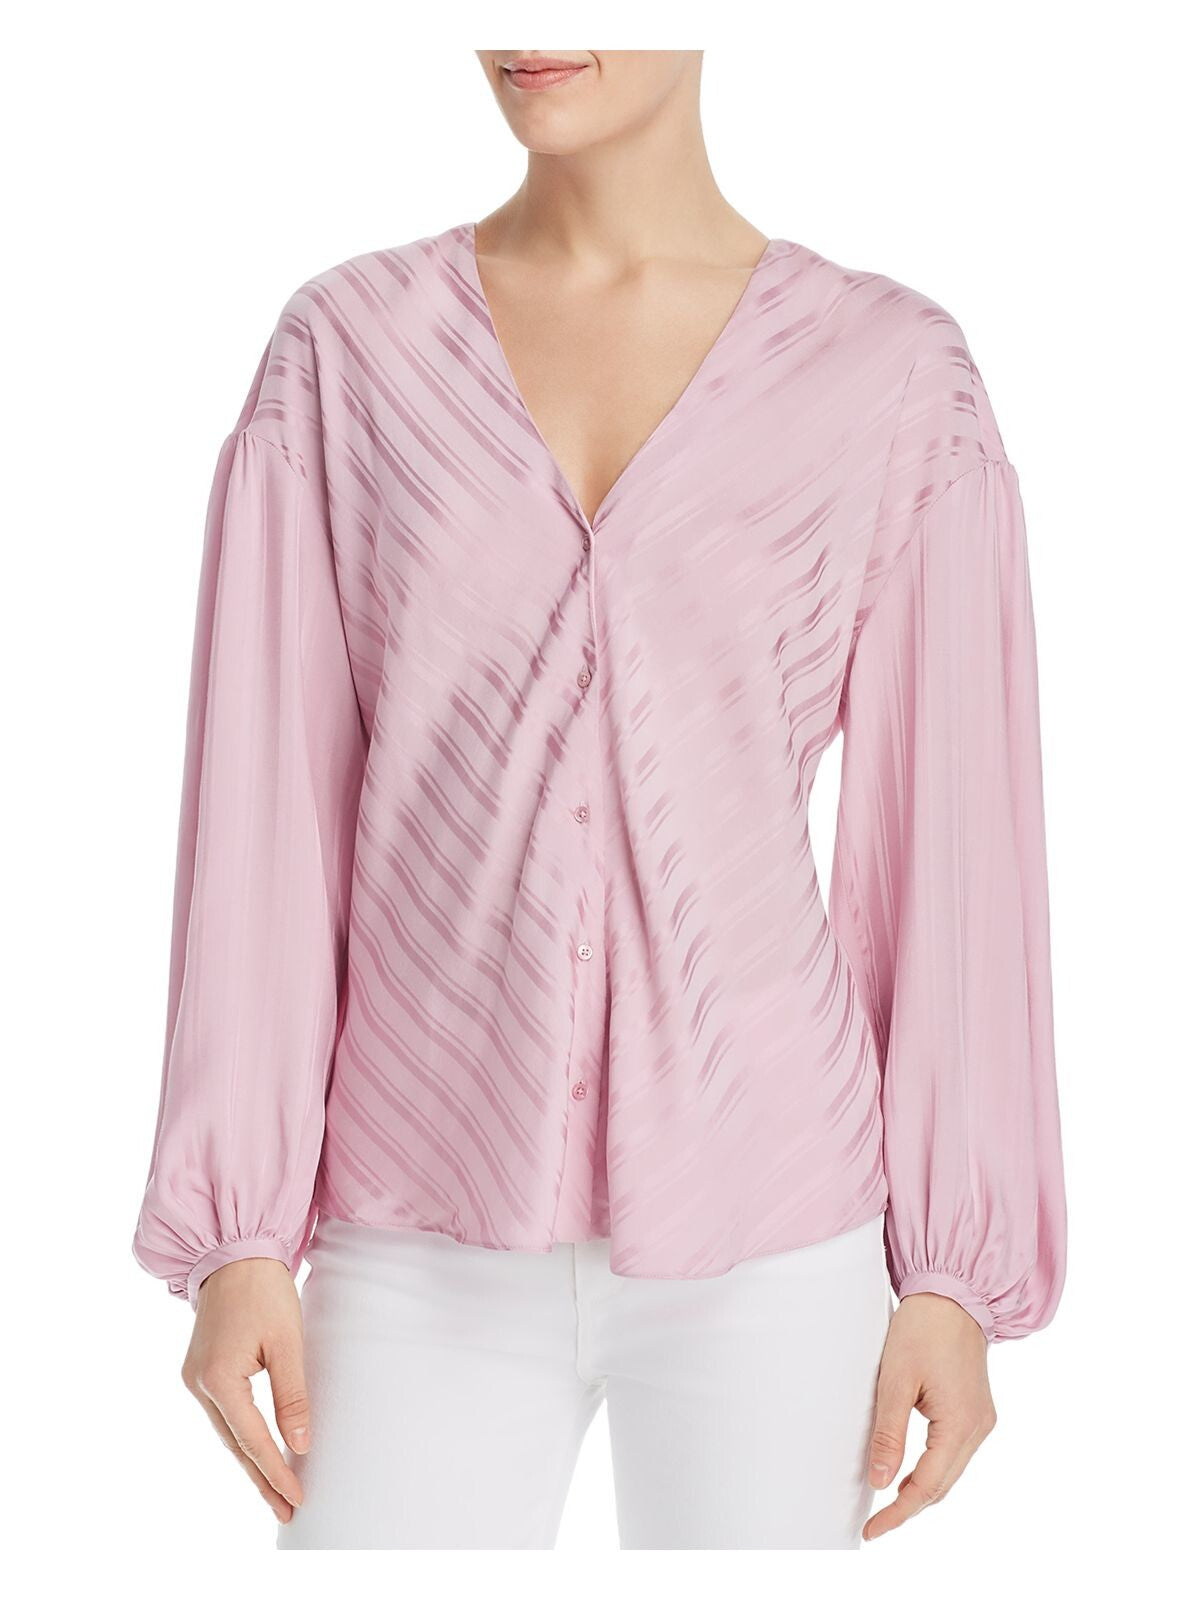 JOIE Womens Pink Long Sleeve V Neck Blouse XS